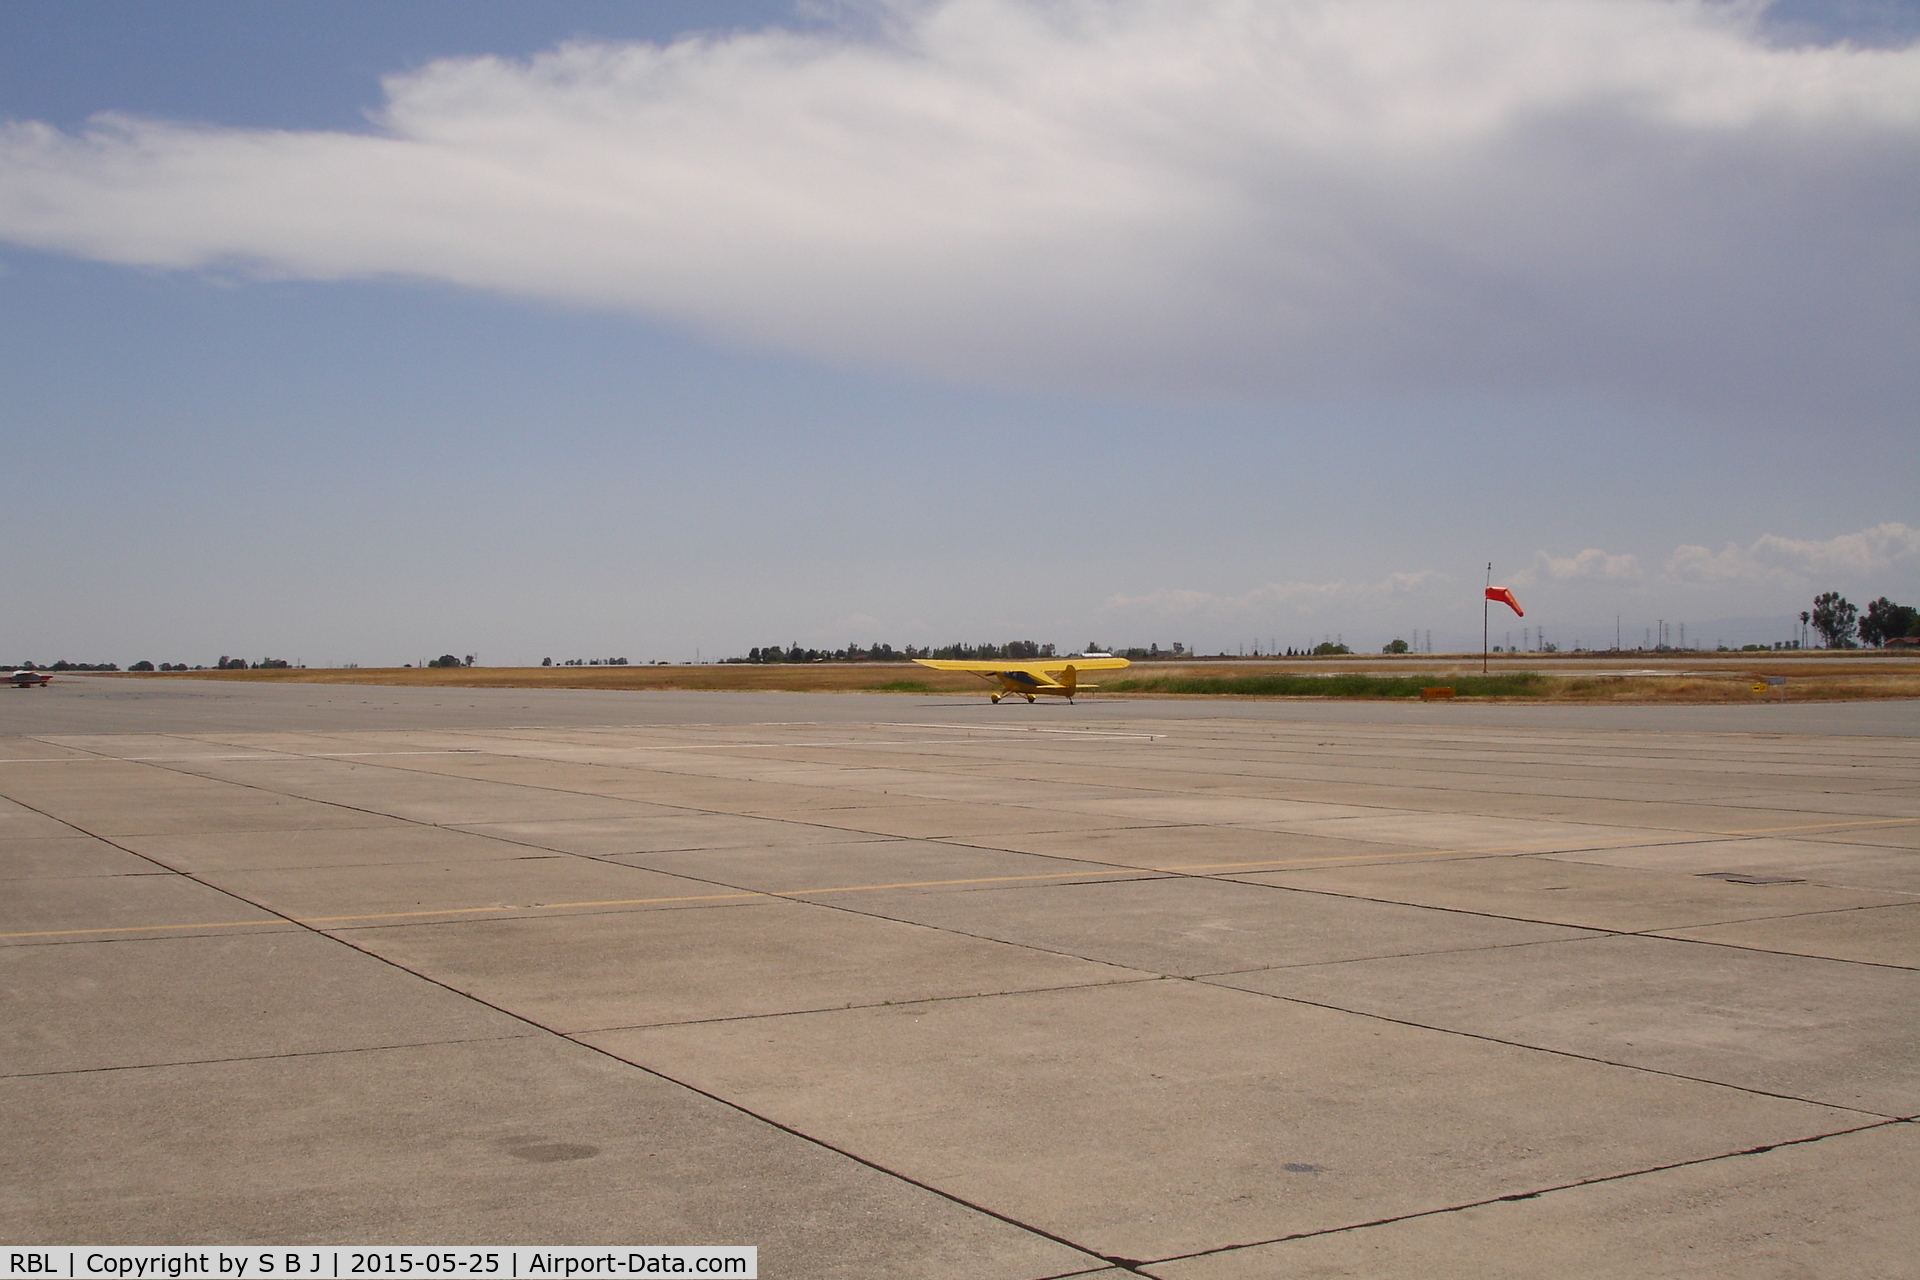 Red Bluff Municipal Airport (RBL) - Red Bluff with view to the south. RBL can be a bit challenging to taildraggers like the one seen taxiing. 